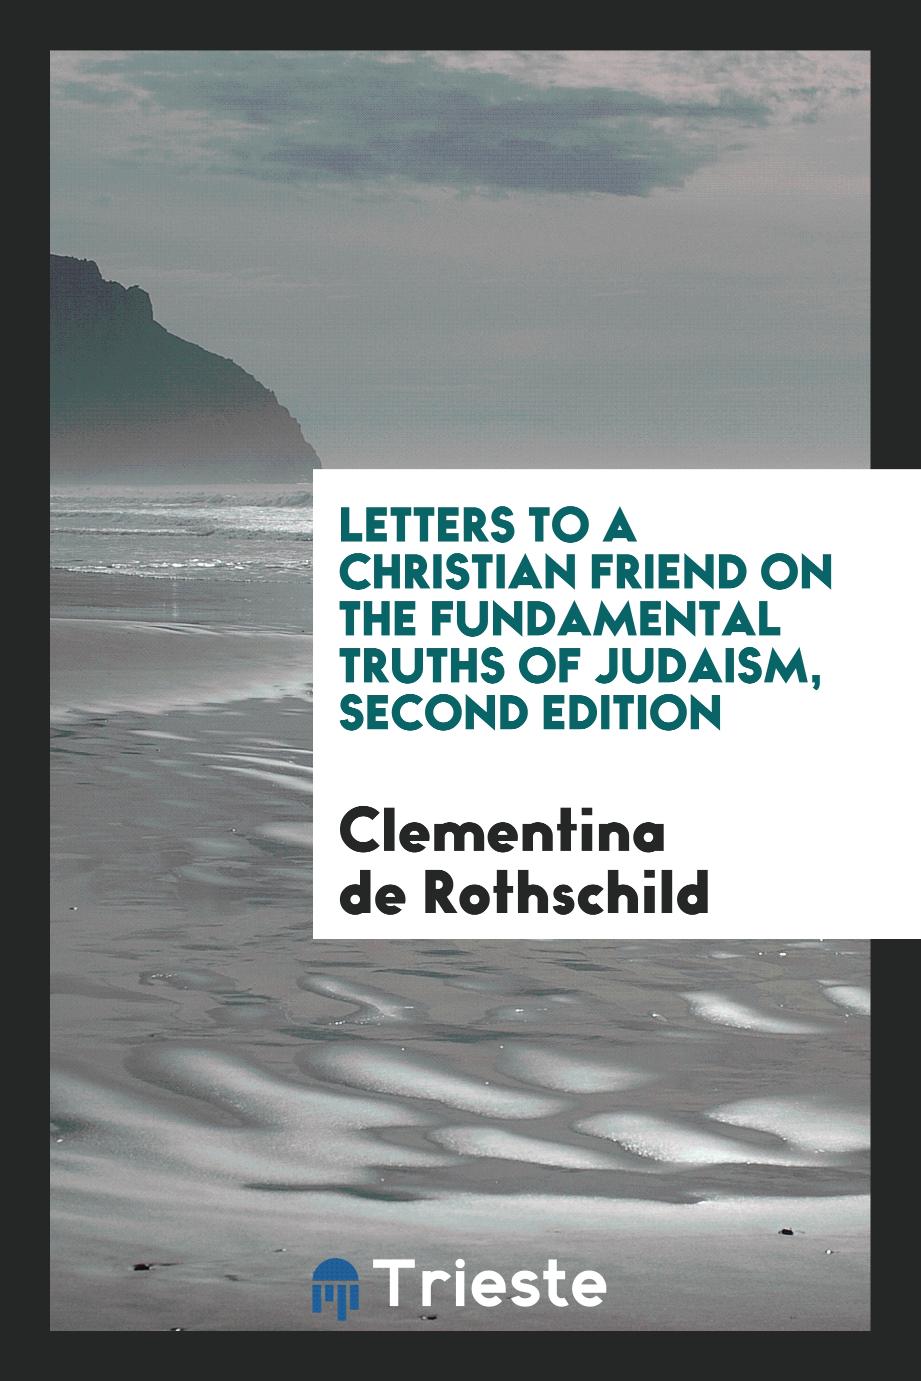 Letters to a Christian Friend on the Fundamental Truths of Judaism, Second Edition